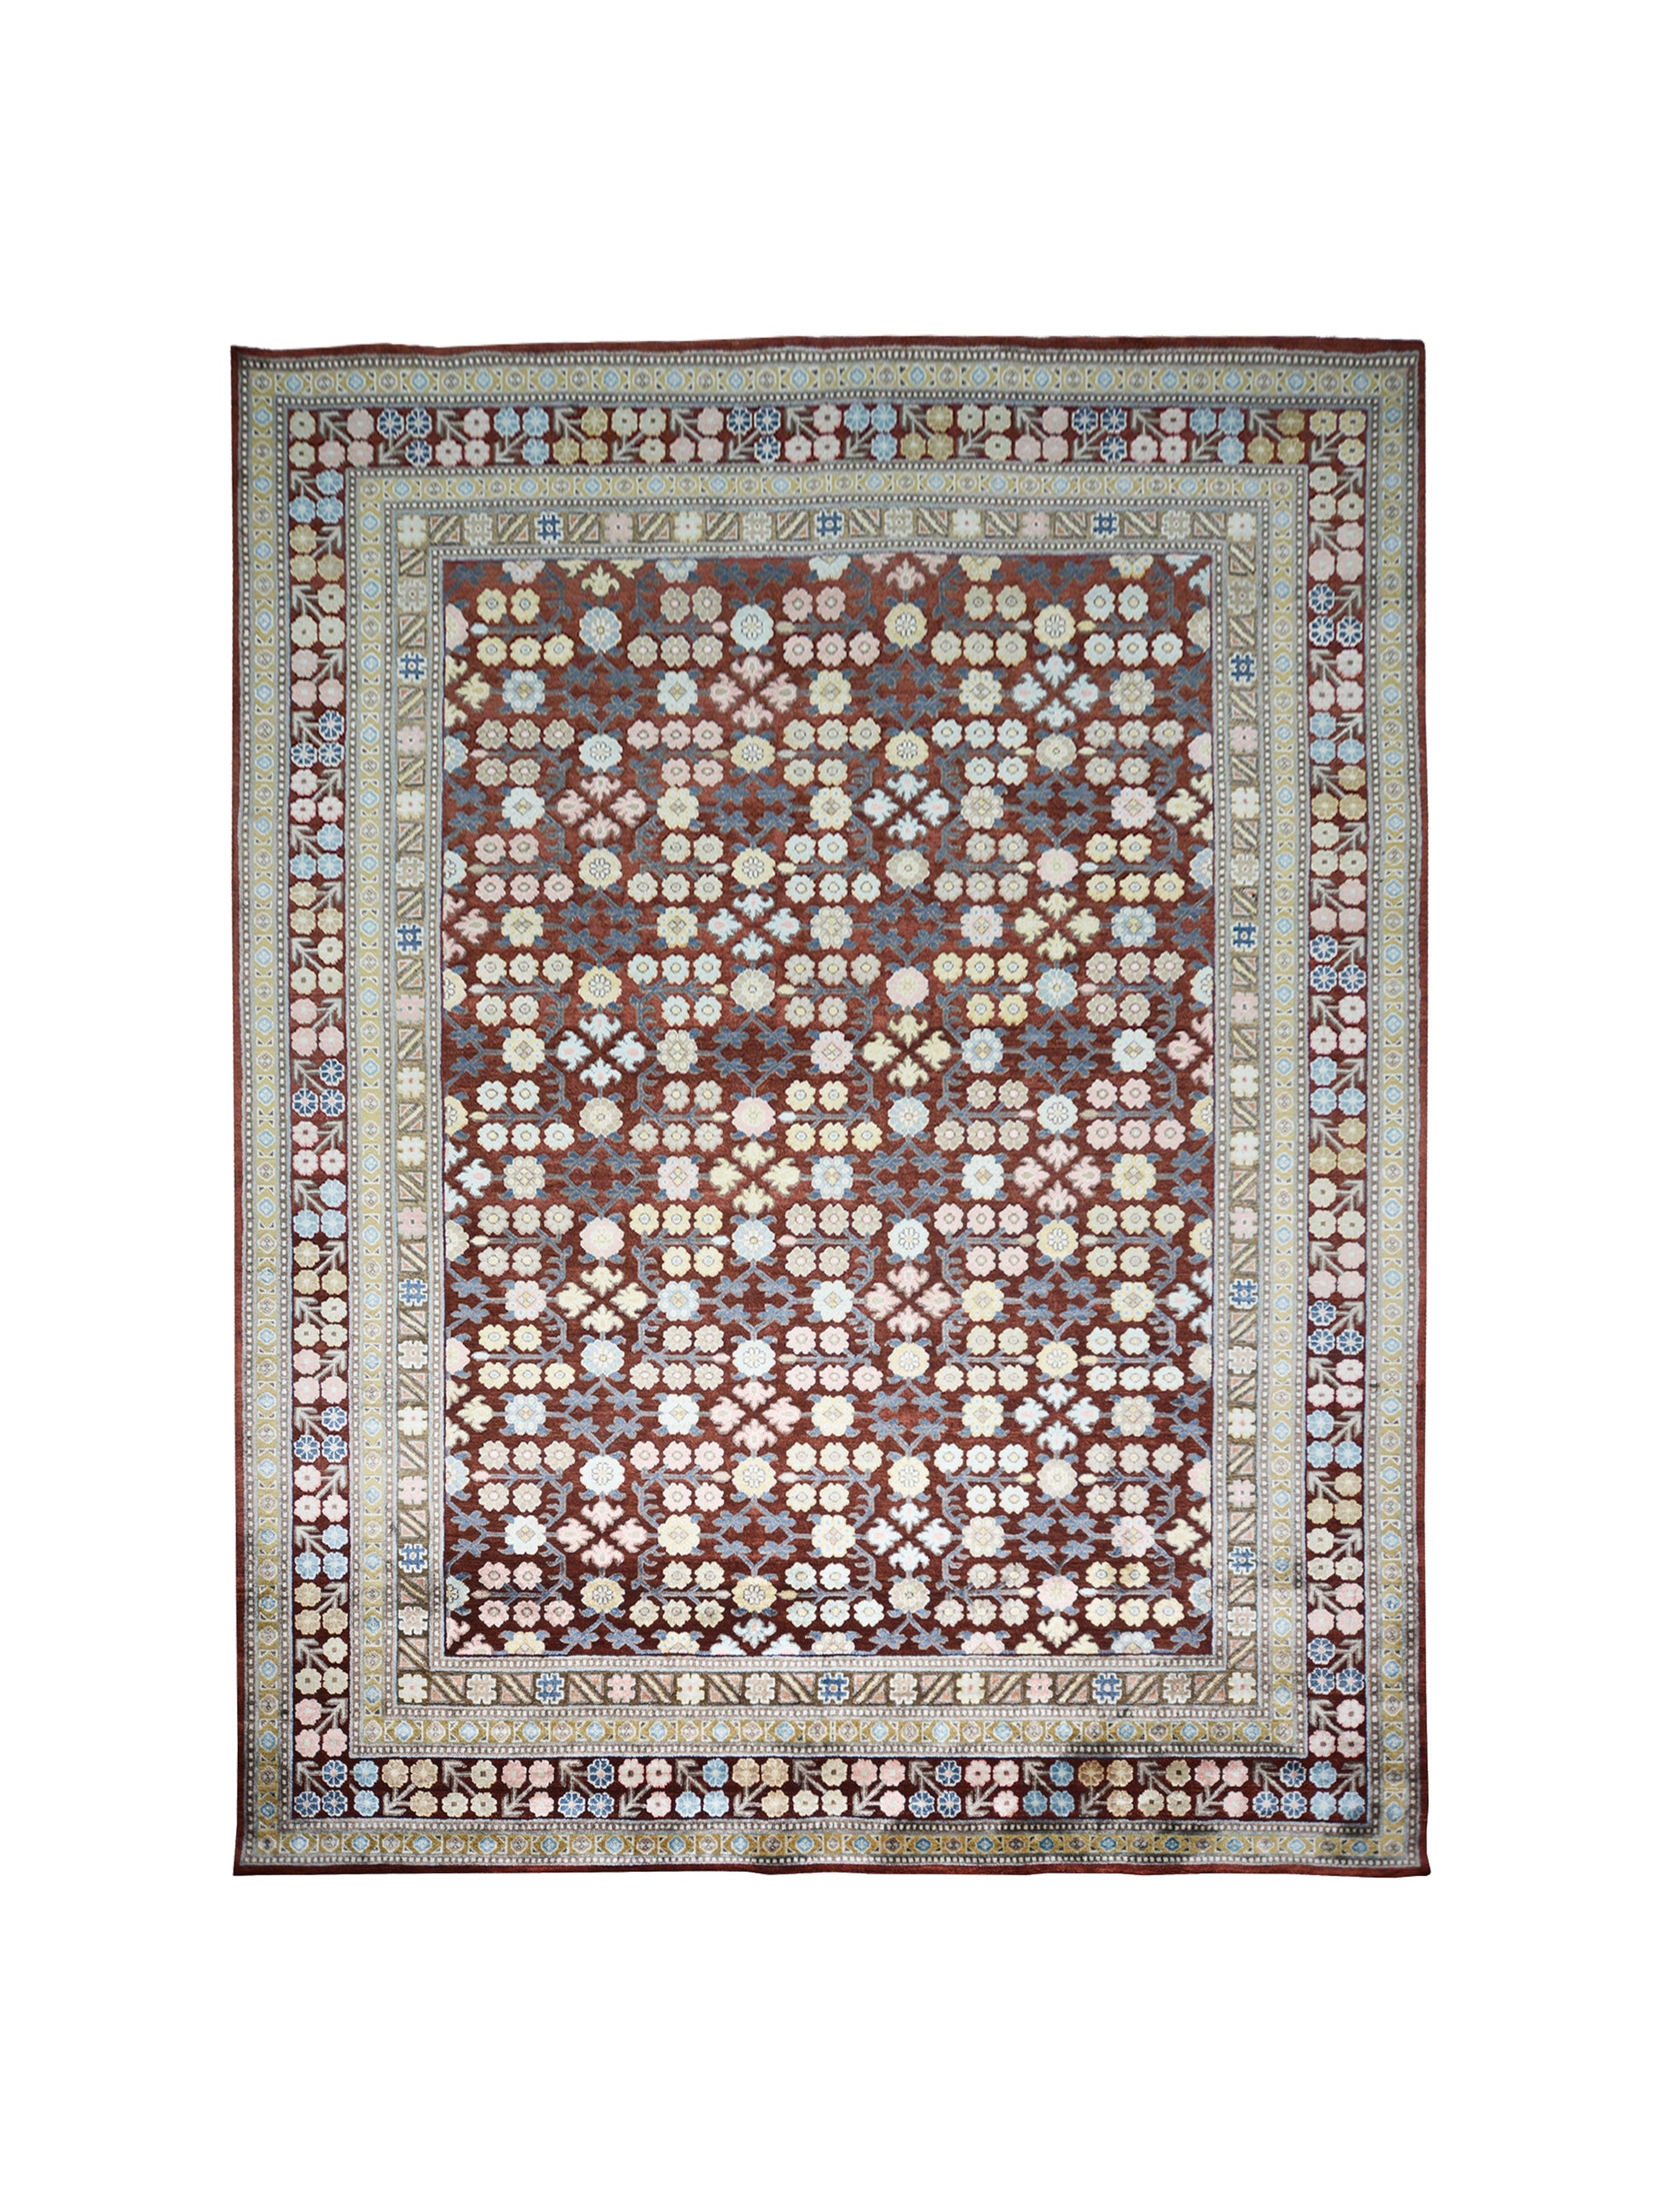 Get trendy with Garden Red, Blue, Camel and Multy Traditional Persian Handknotted Area Rug - Traditional Rugs available at Jaipur Oriental Rugs. Grab yours for $4285.00 today!